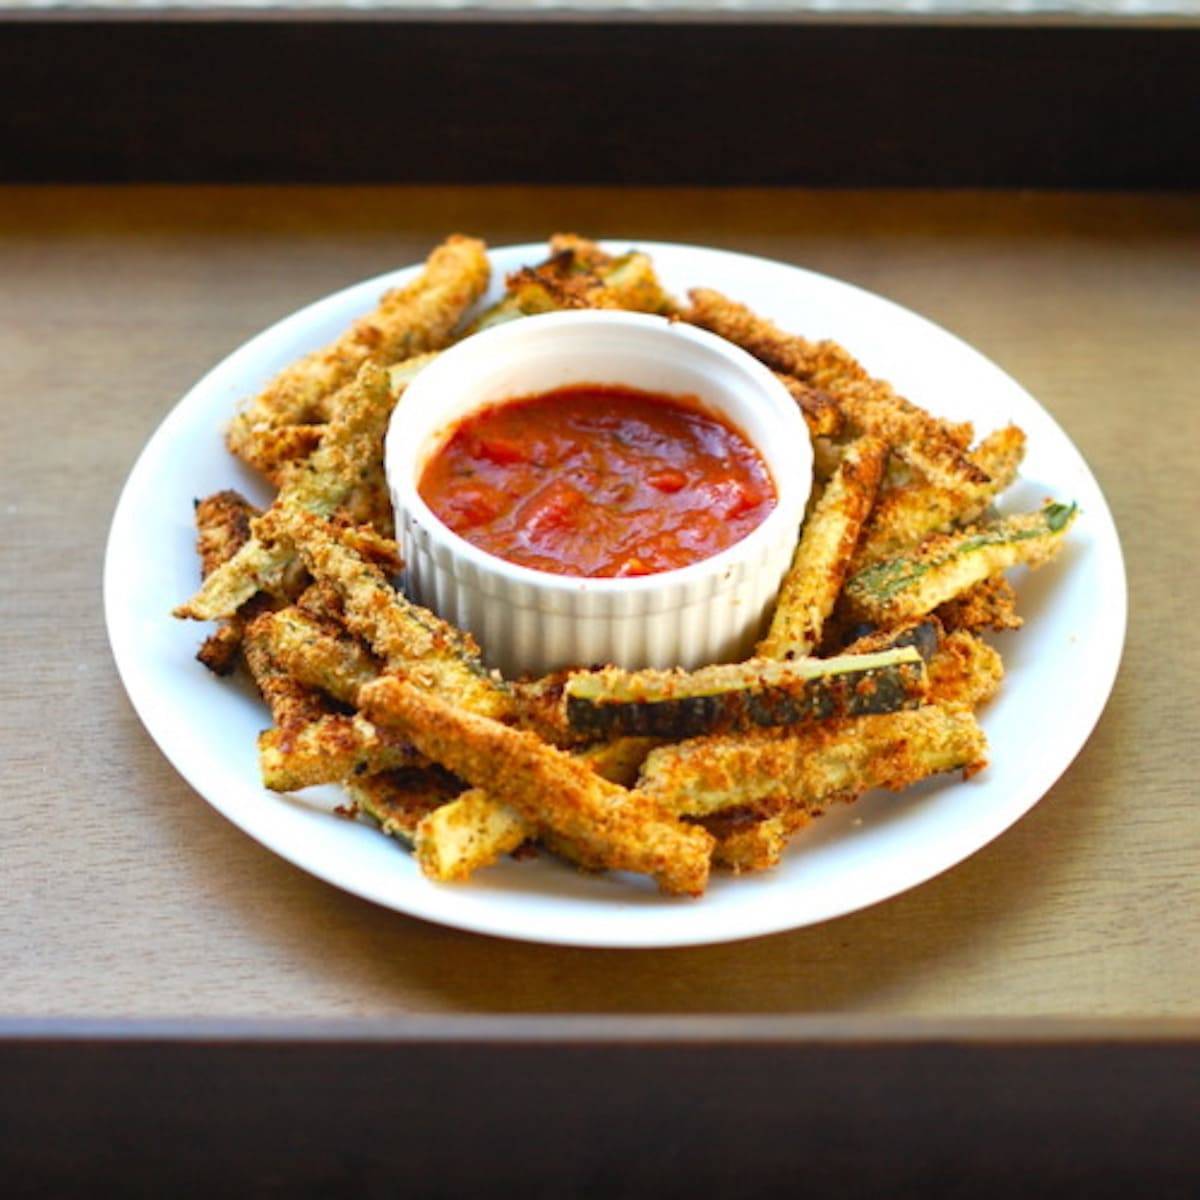 Baked zucchini fries with dipping marinara sauce.